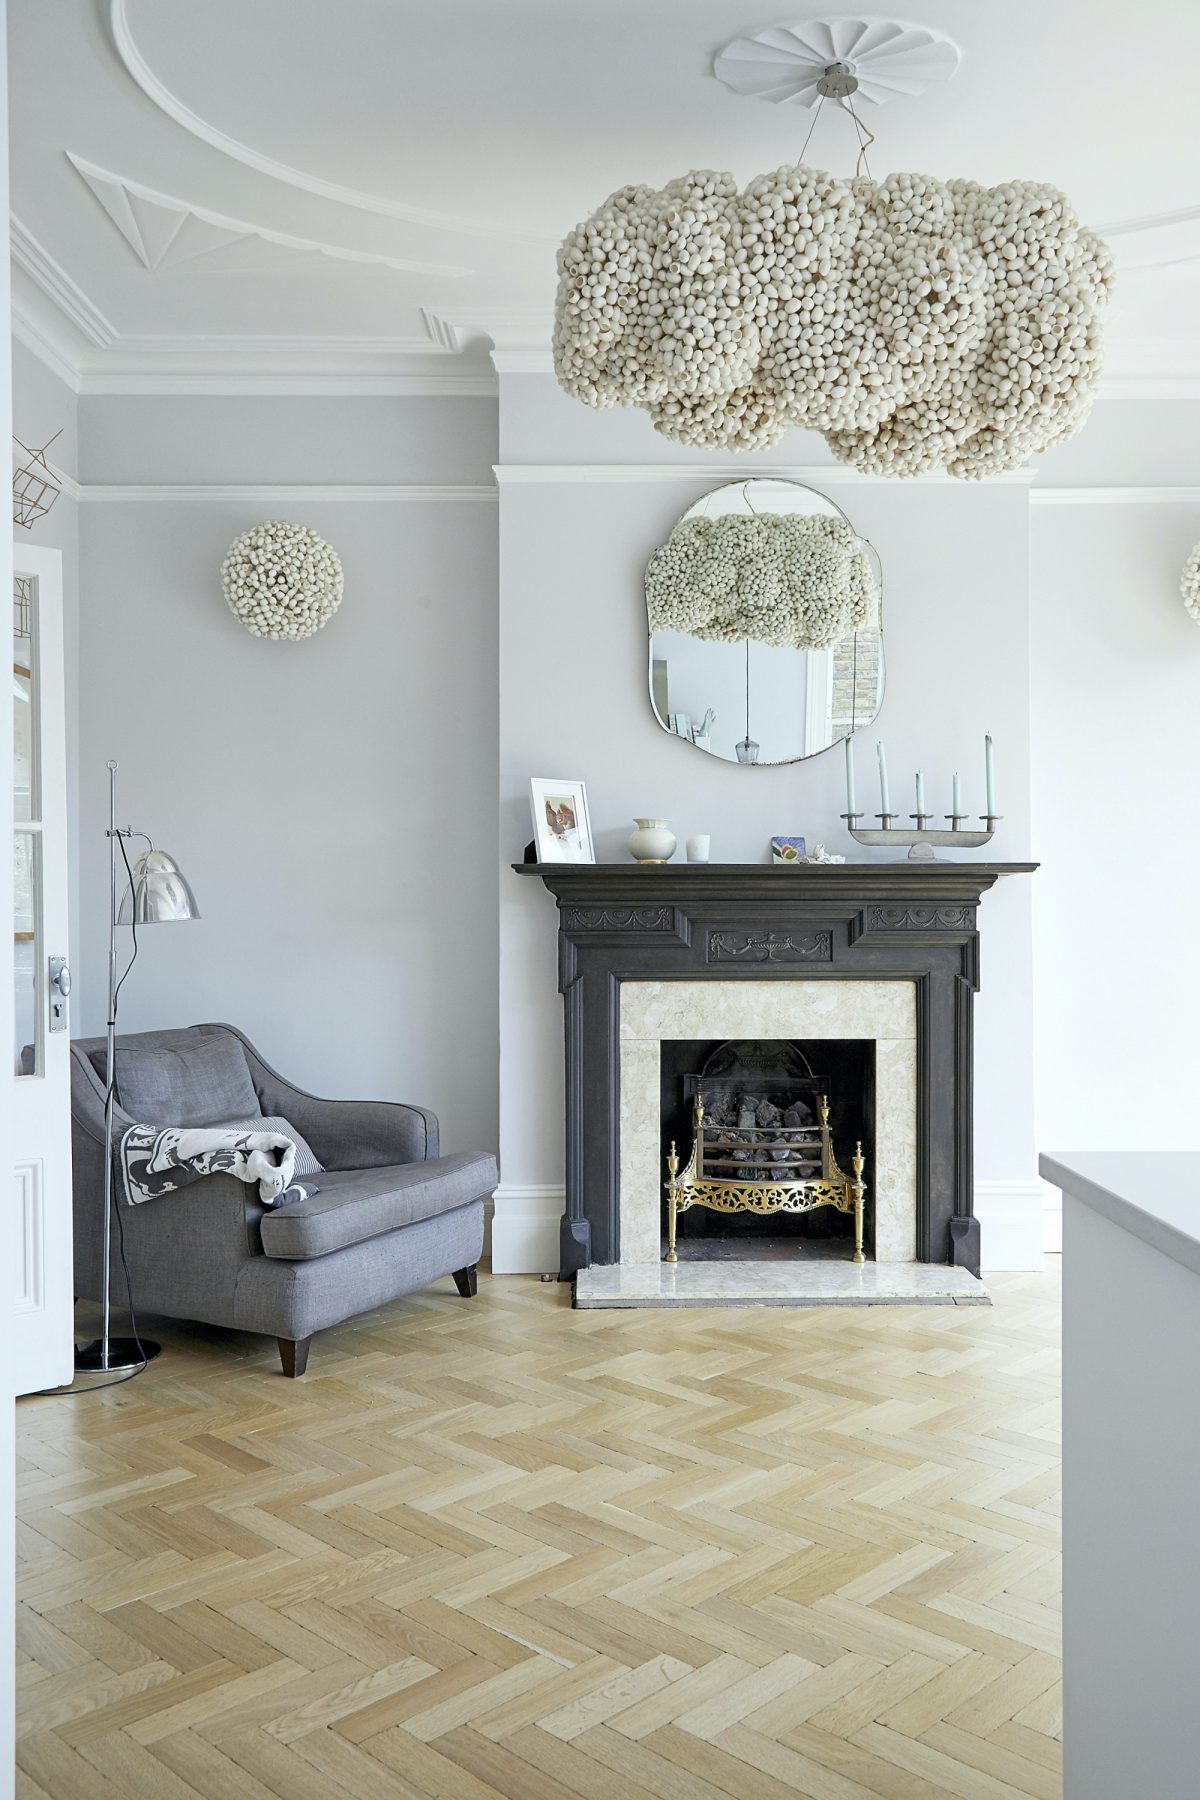 Home Sweet Home: London Chic